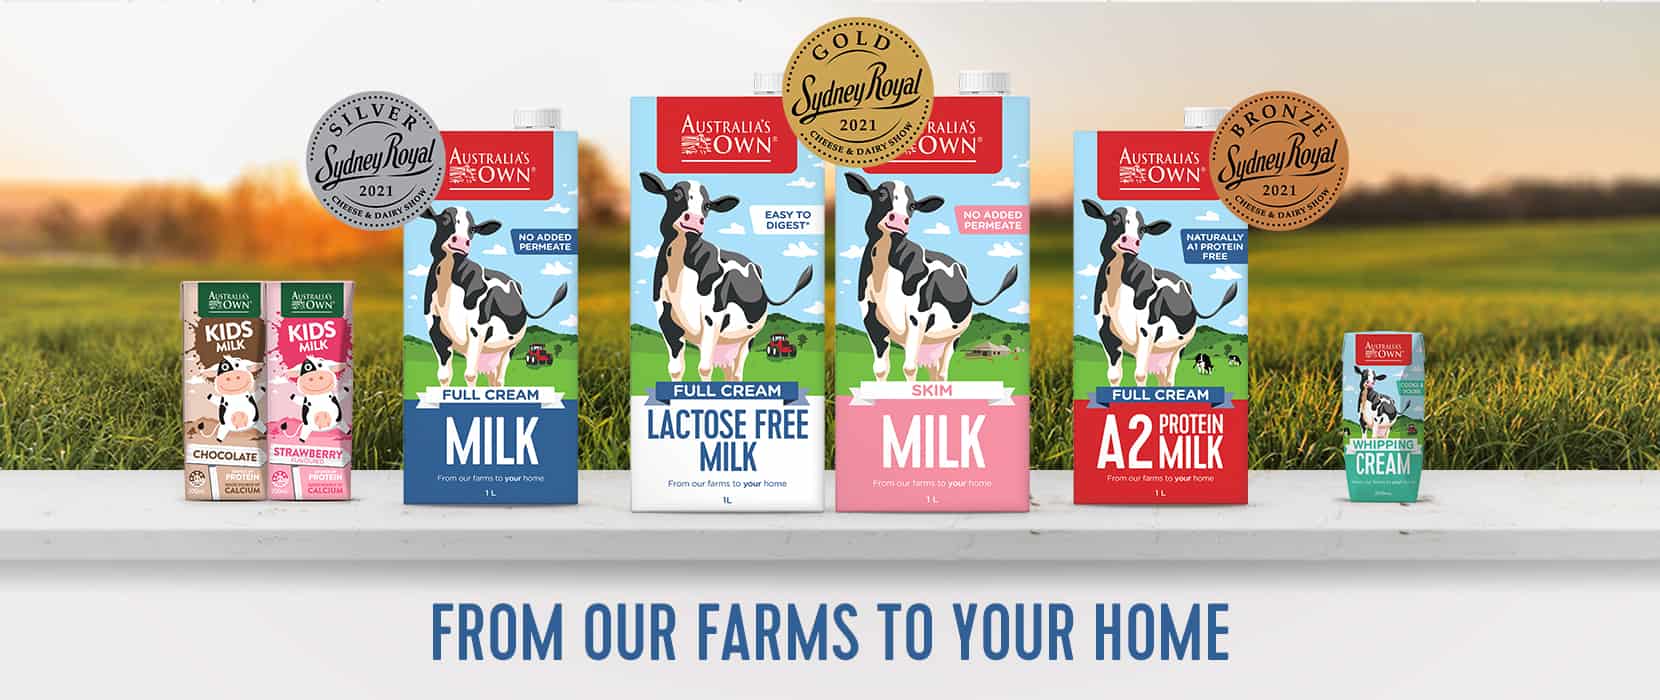 From our farms to your home